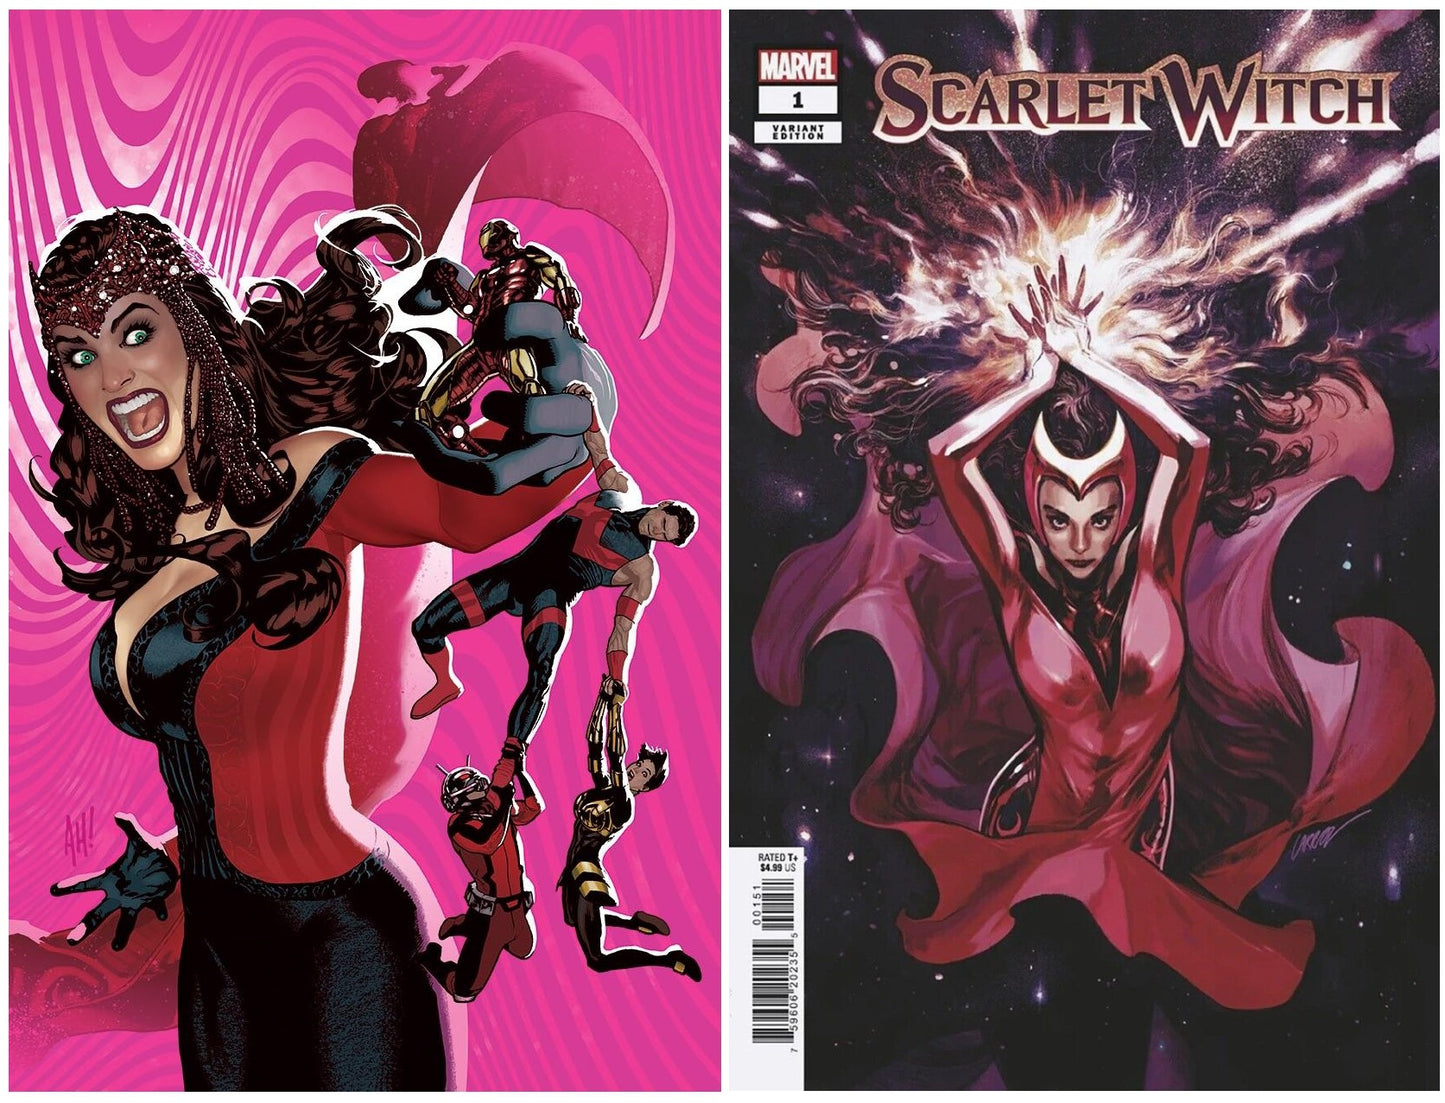 SCARLET WITCH #1 ADAM HUGHES VIRGIN VARIANT LIMITED TO 500 COPIES + 1:25 VARIANT